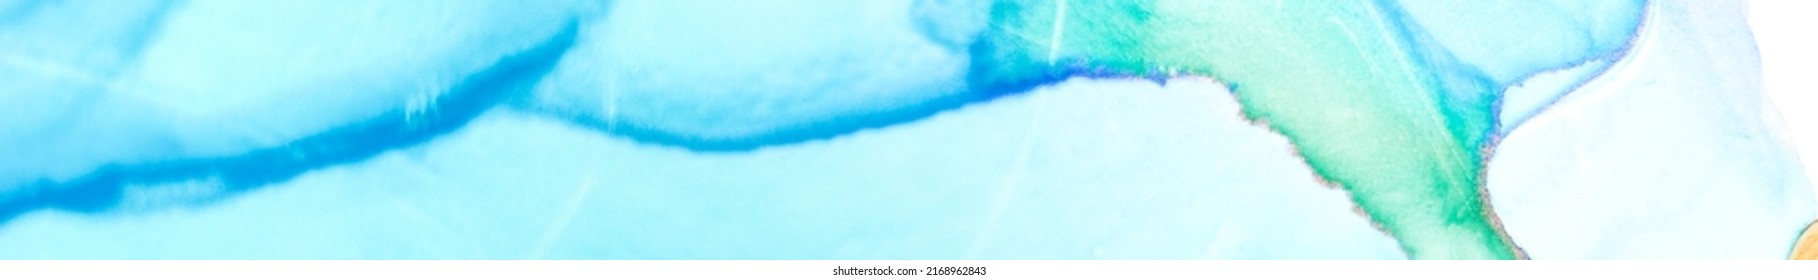 Blue Water Color Marble. Modern Abstract Template Blue Marble Background. Green Ink Paint. Teal Alcohol Ink Marble. Ocean Alcohol Ink Background. Light Elegant Art Texture. Green Abstract Watercolor.